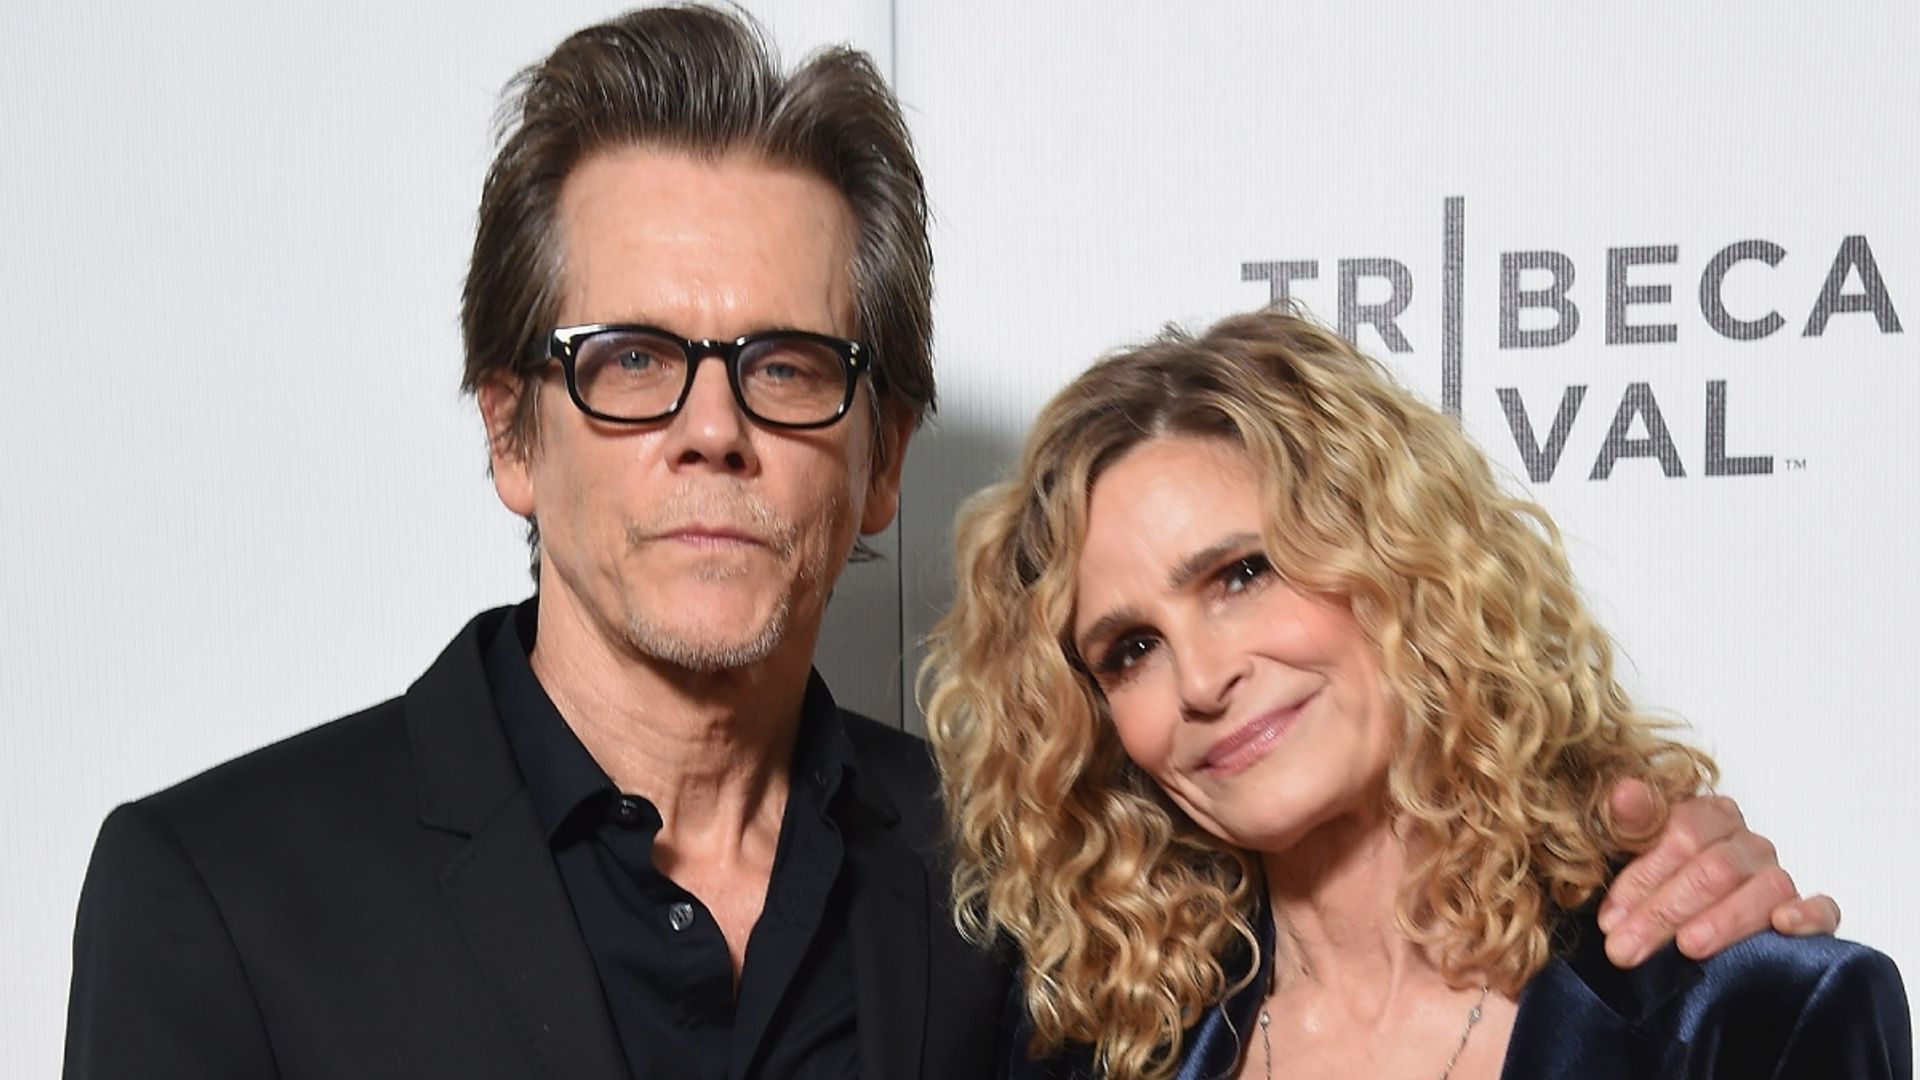 Kevin Bacon's wife Kyra Sedgwick returns to social media with quirky selfie